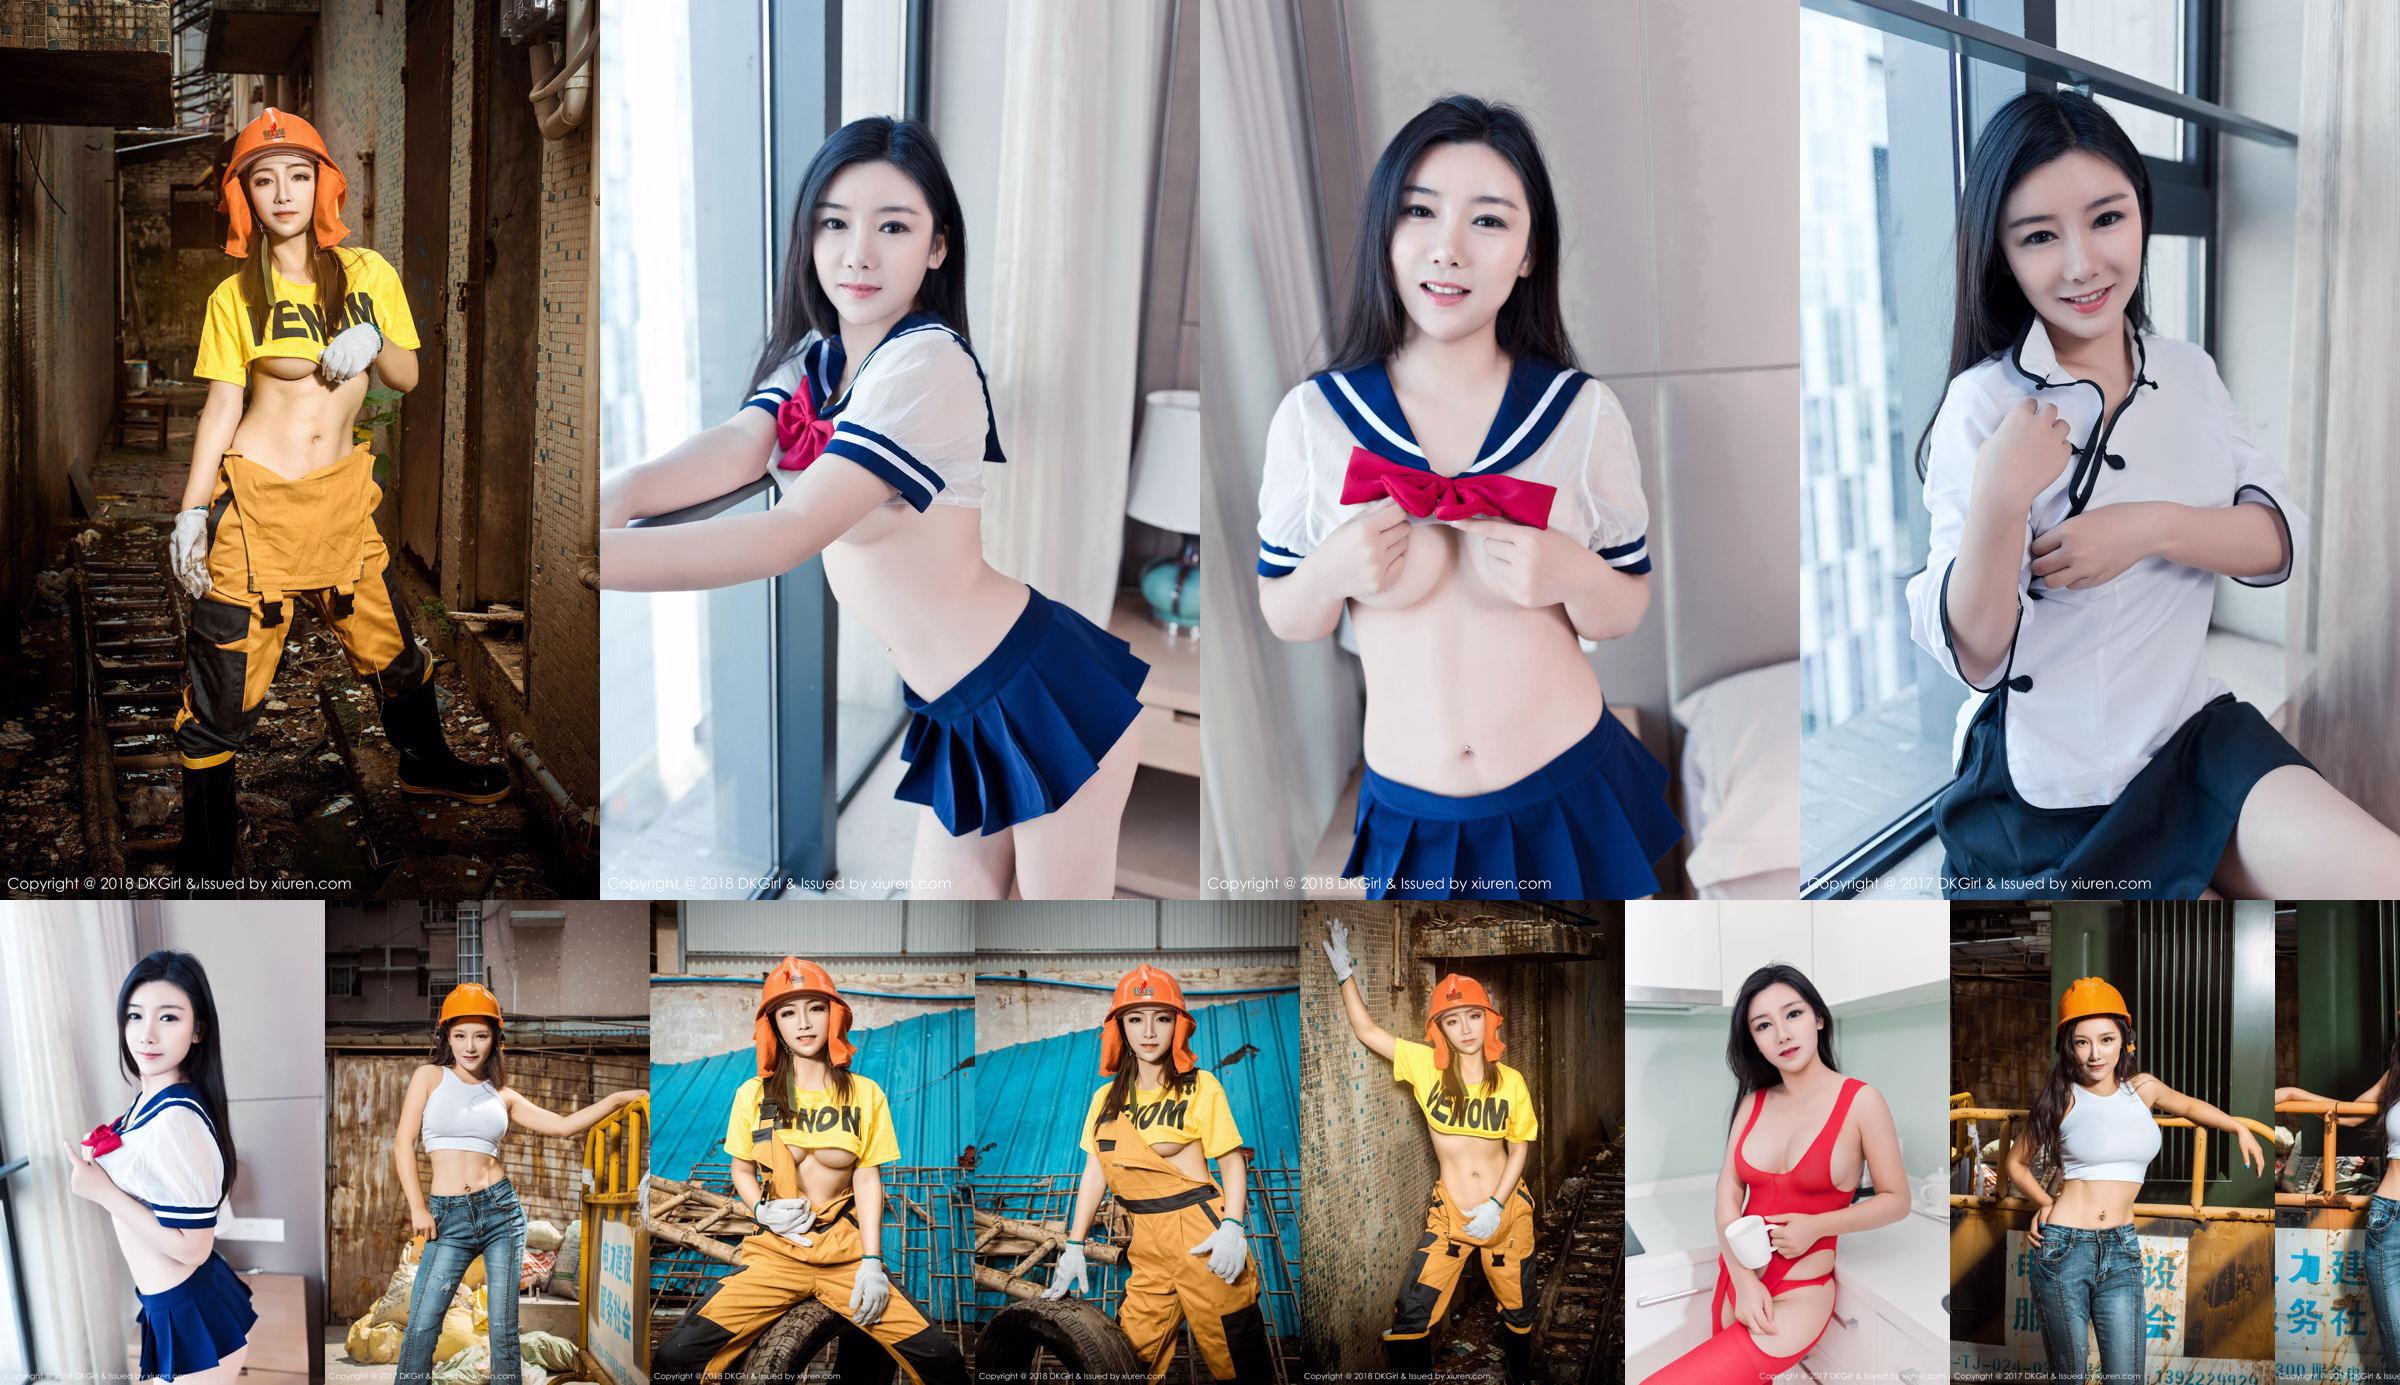 Yuanmei "Working Outfits Sexy and Wild" [DKGirl] Vol.077 No.8573bd Page 1